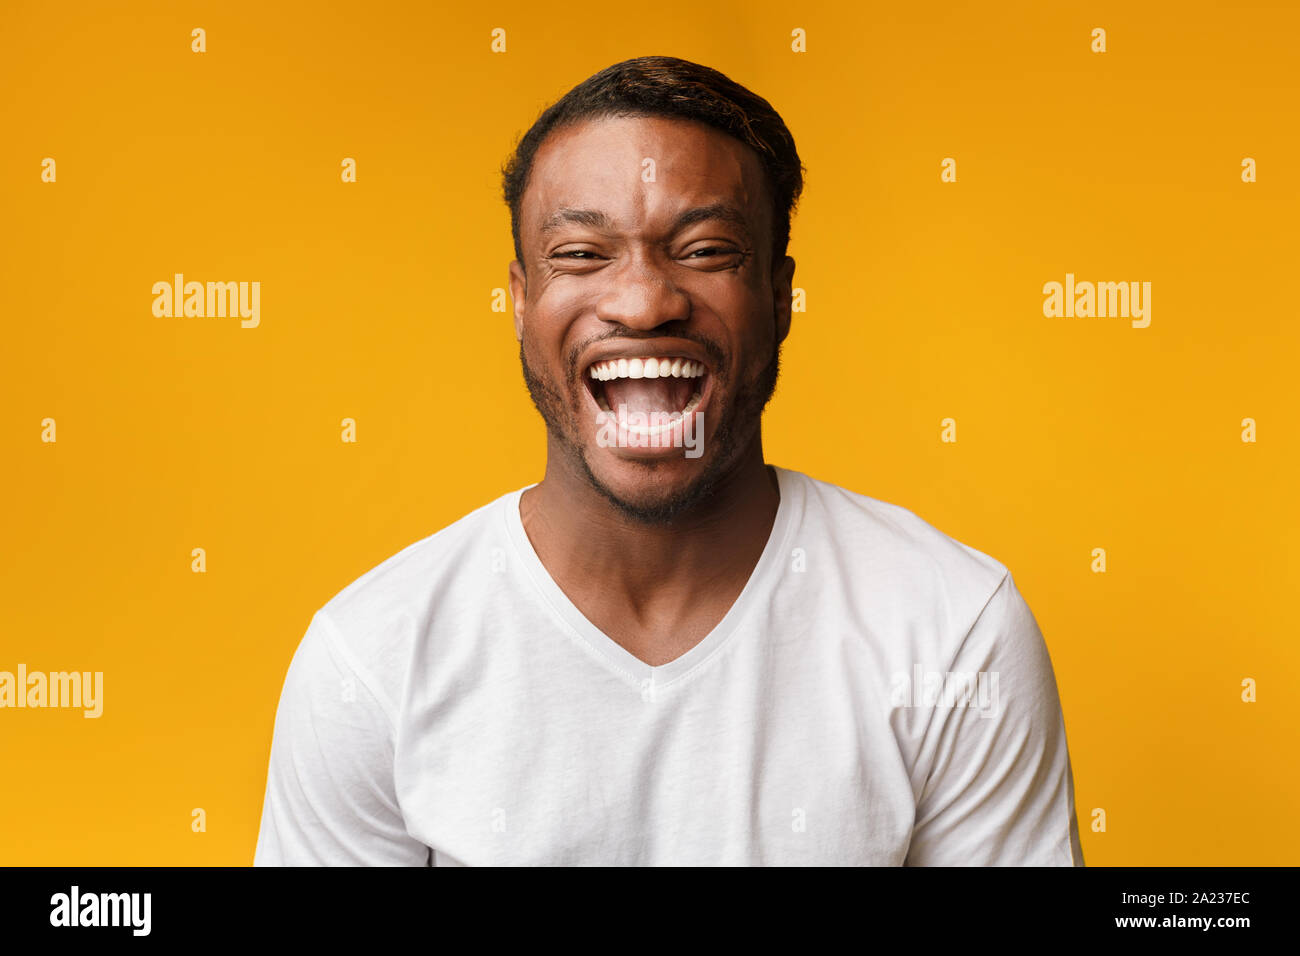 Lol Key Meaning Hilarious Humorous Or Laughing Out Loud Stock Photo - Alamy